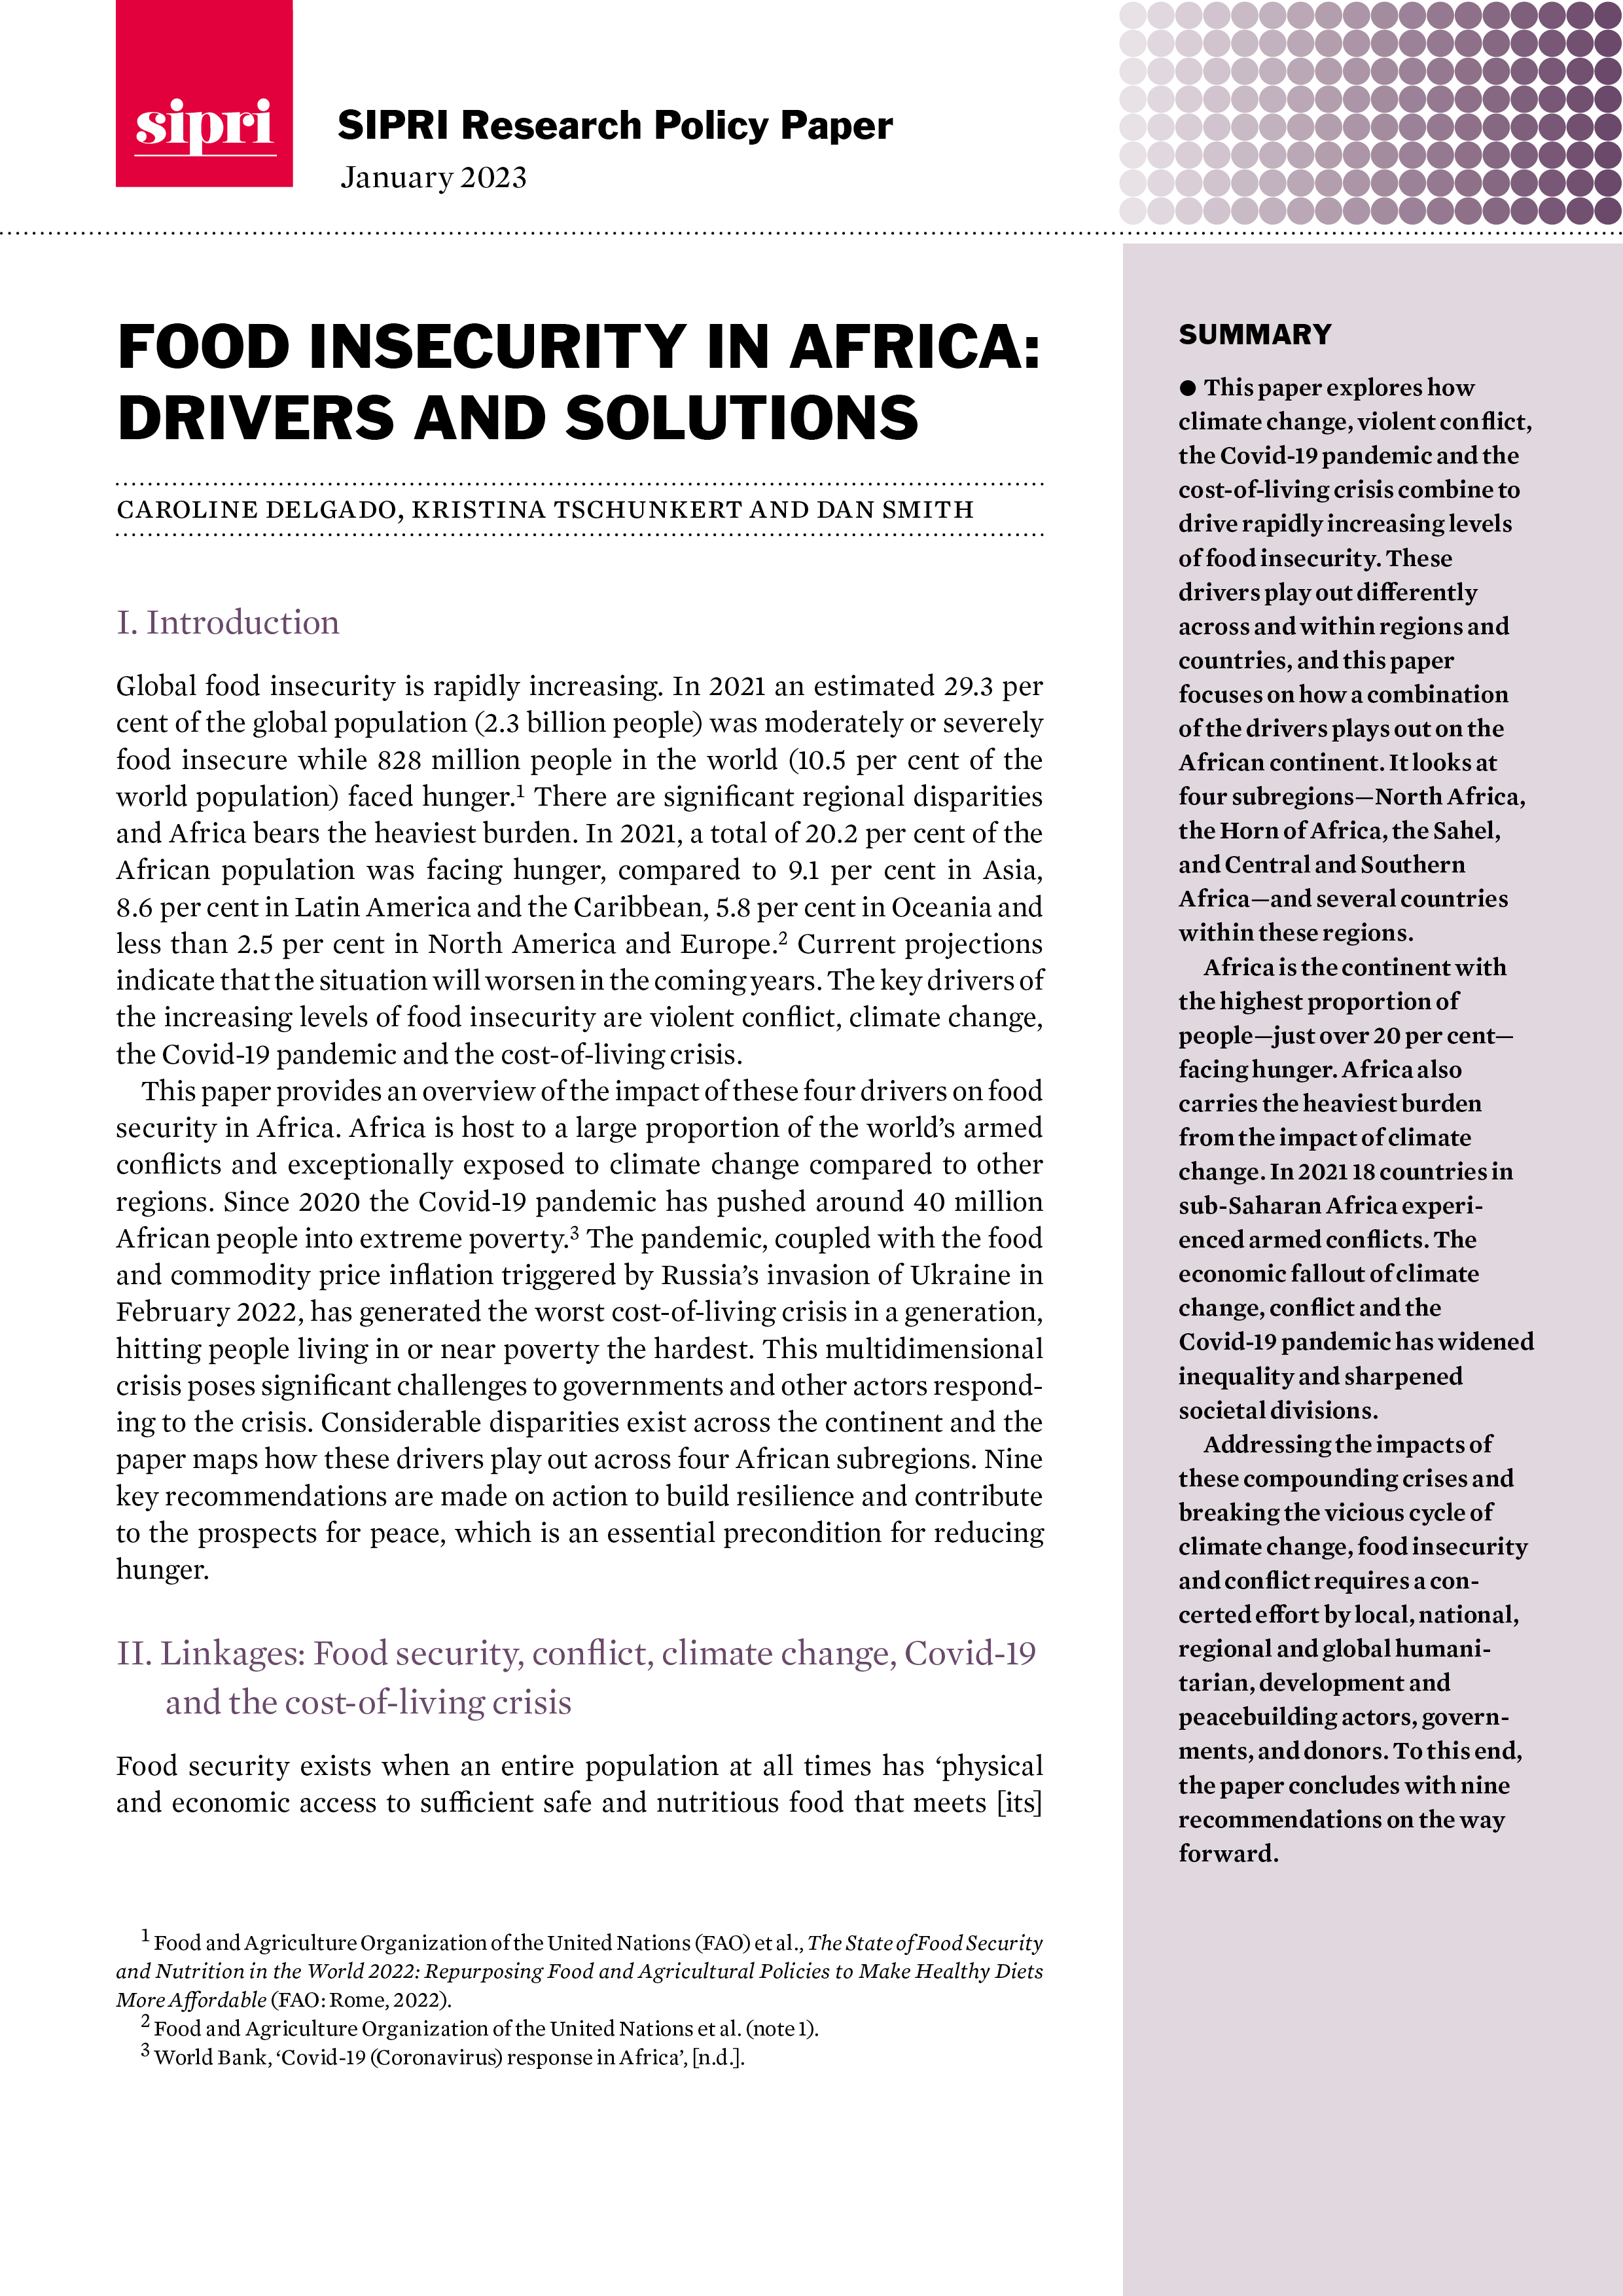 Food Insecurity in Africa: Drivers and Solutions | SIPRI